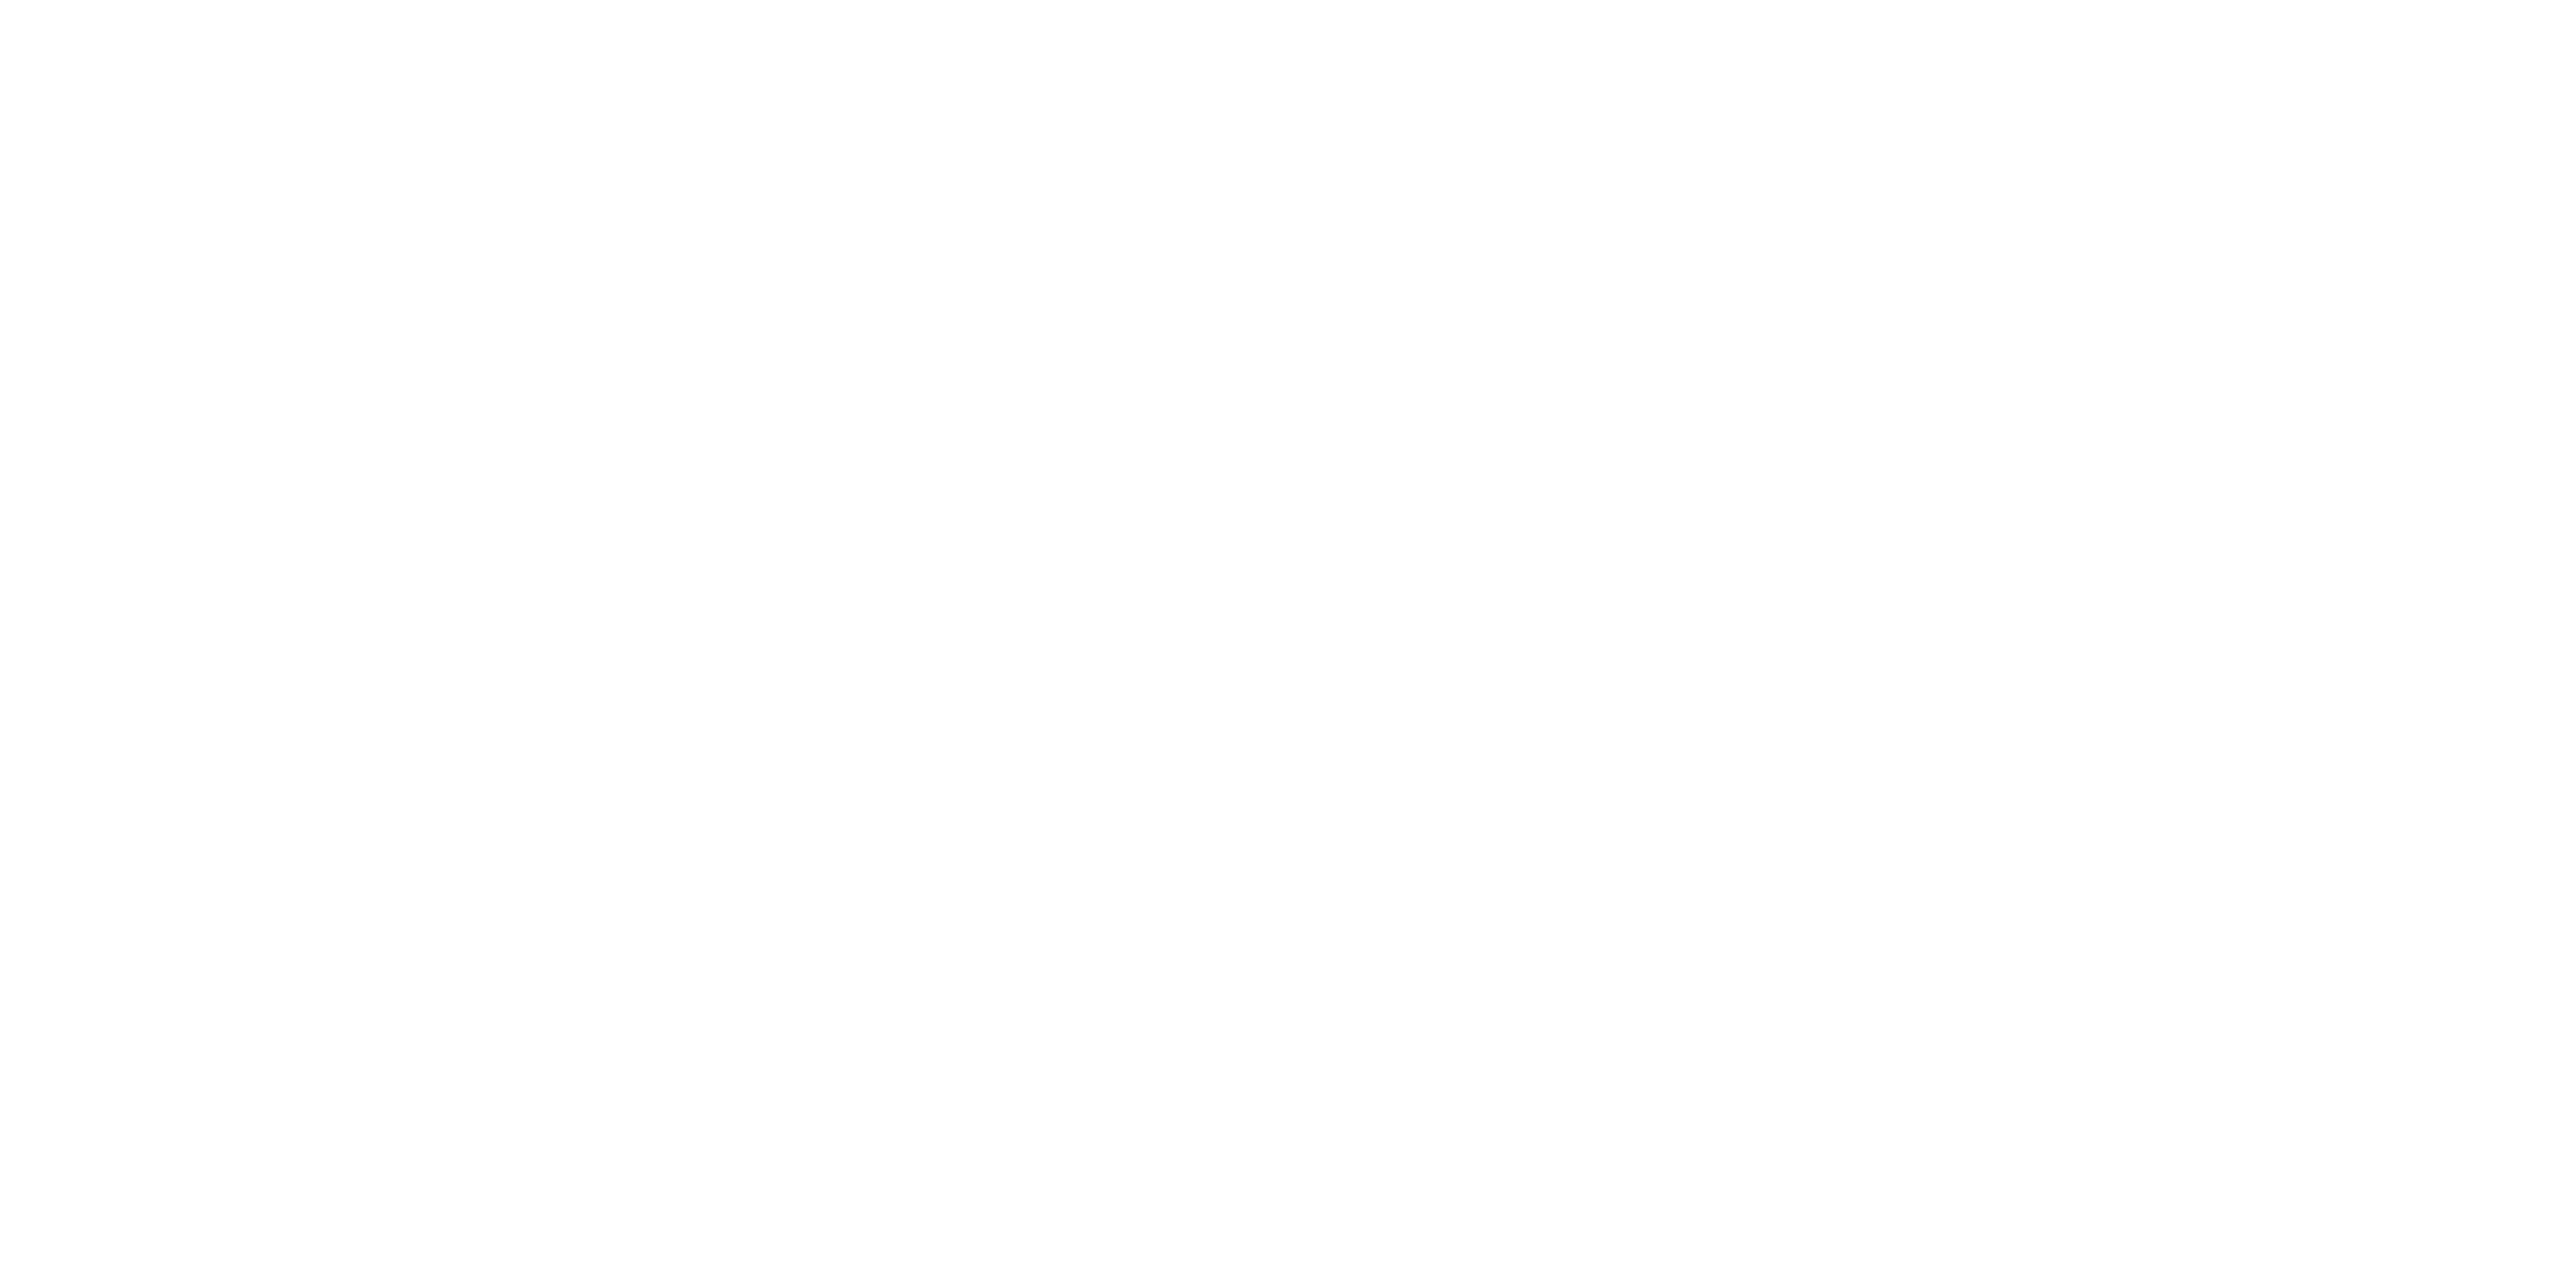 cropped-AnotherRound_LogoWhite-1.png